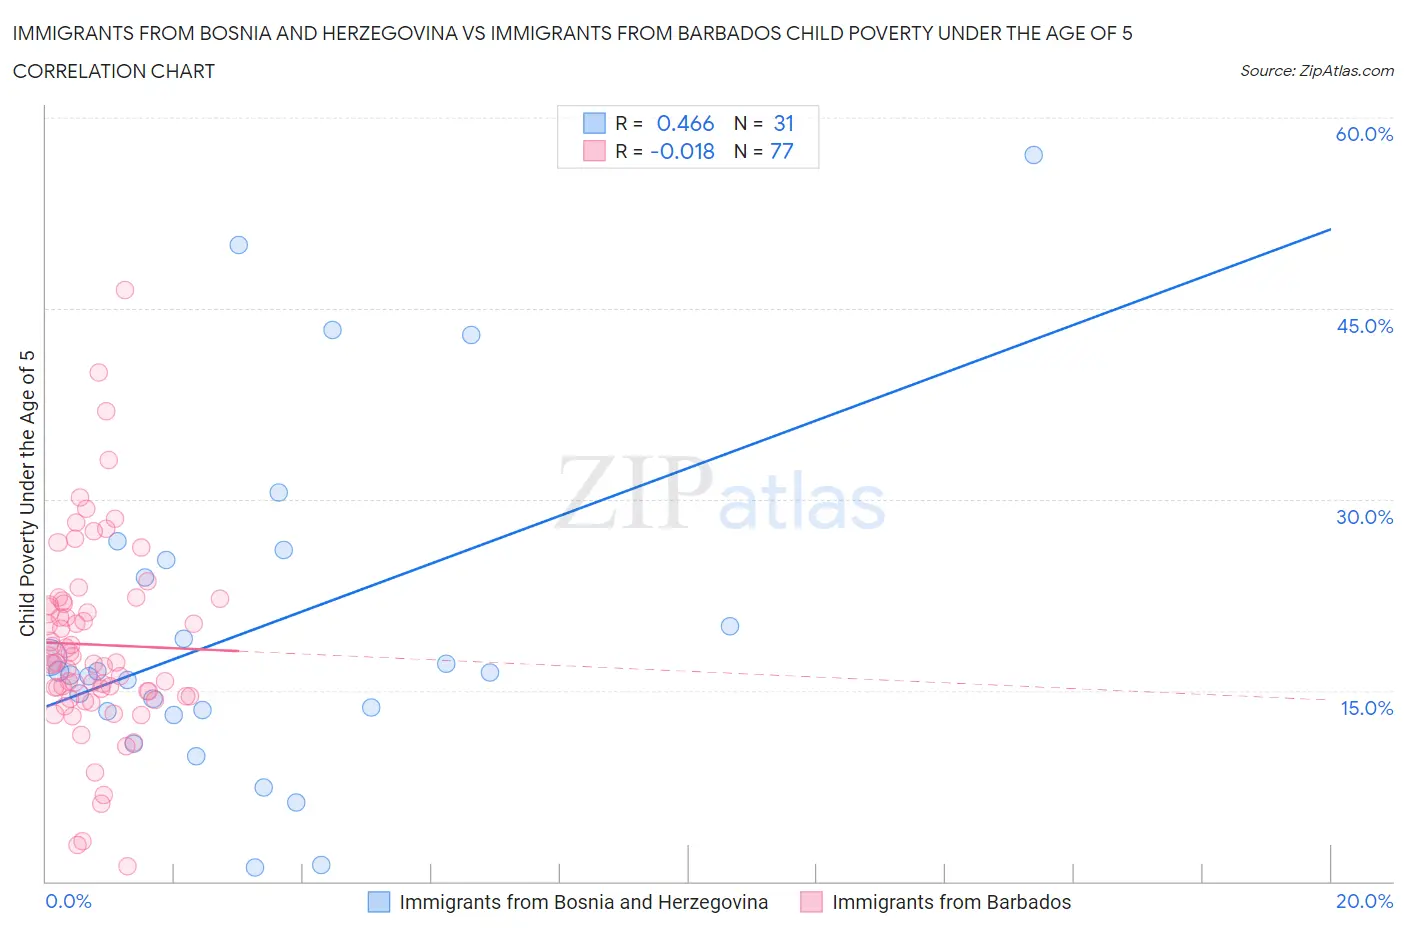 Immigrants from Bosnia and Herzegovina vs Immigrants from Barbados Child Poverty Under the Age of 5